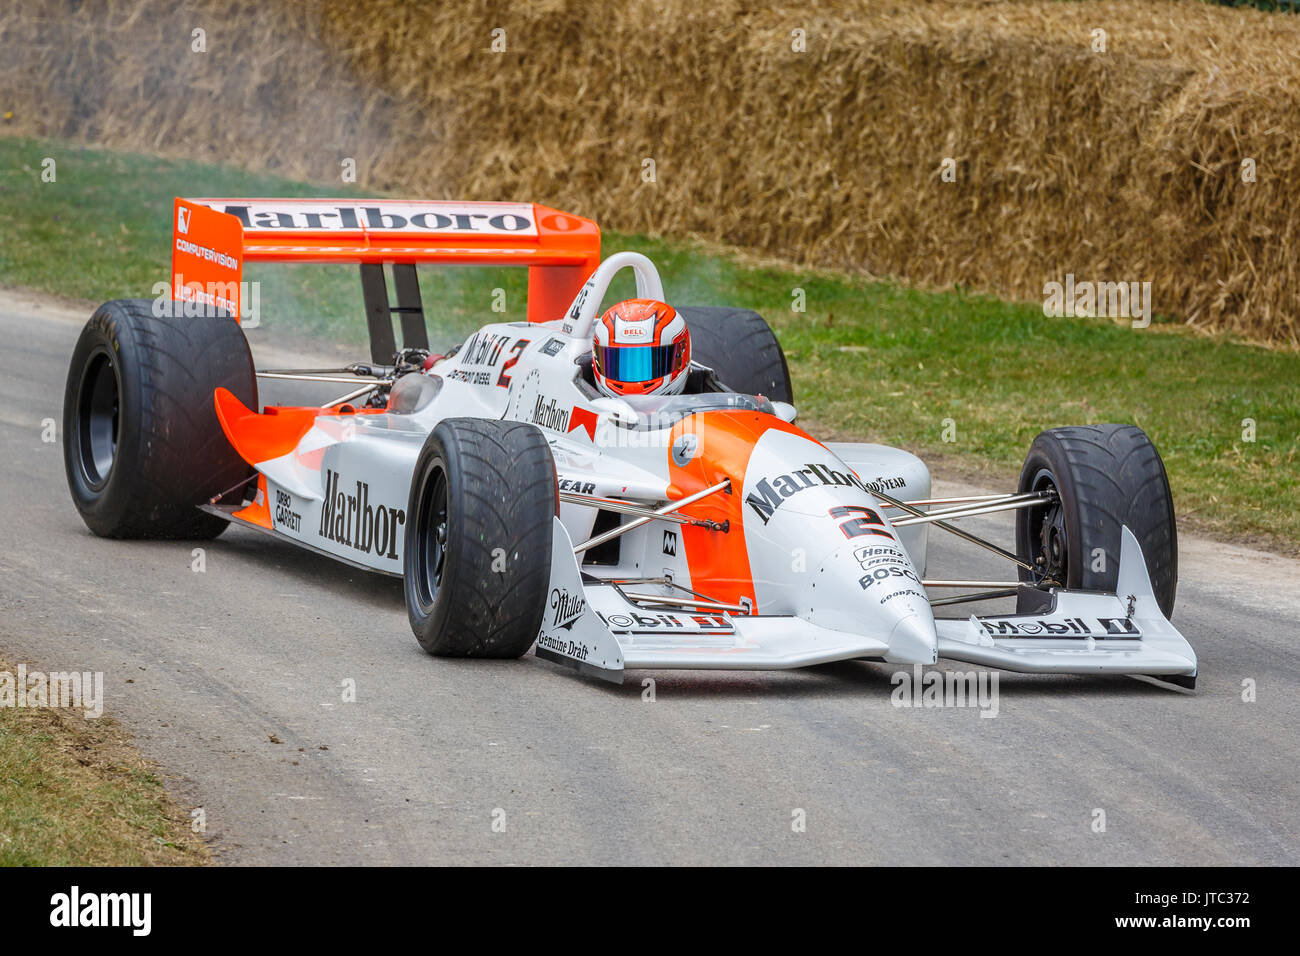 1993 Penske-Chevrolet PC22 CART racer with driver Jeremy Smith at the 2017  Goodwood Festival of Speed, Sussex, UK Stock Photo - Alamy